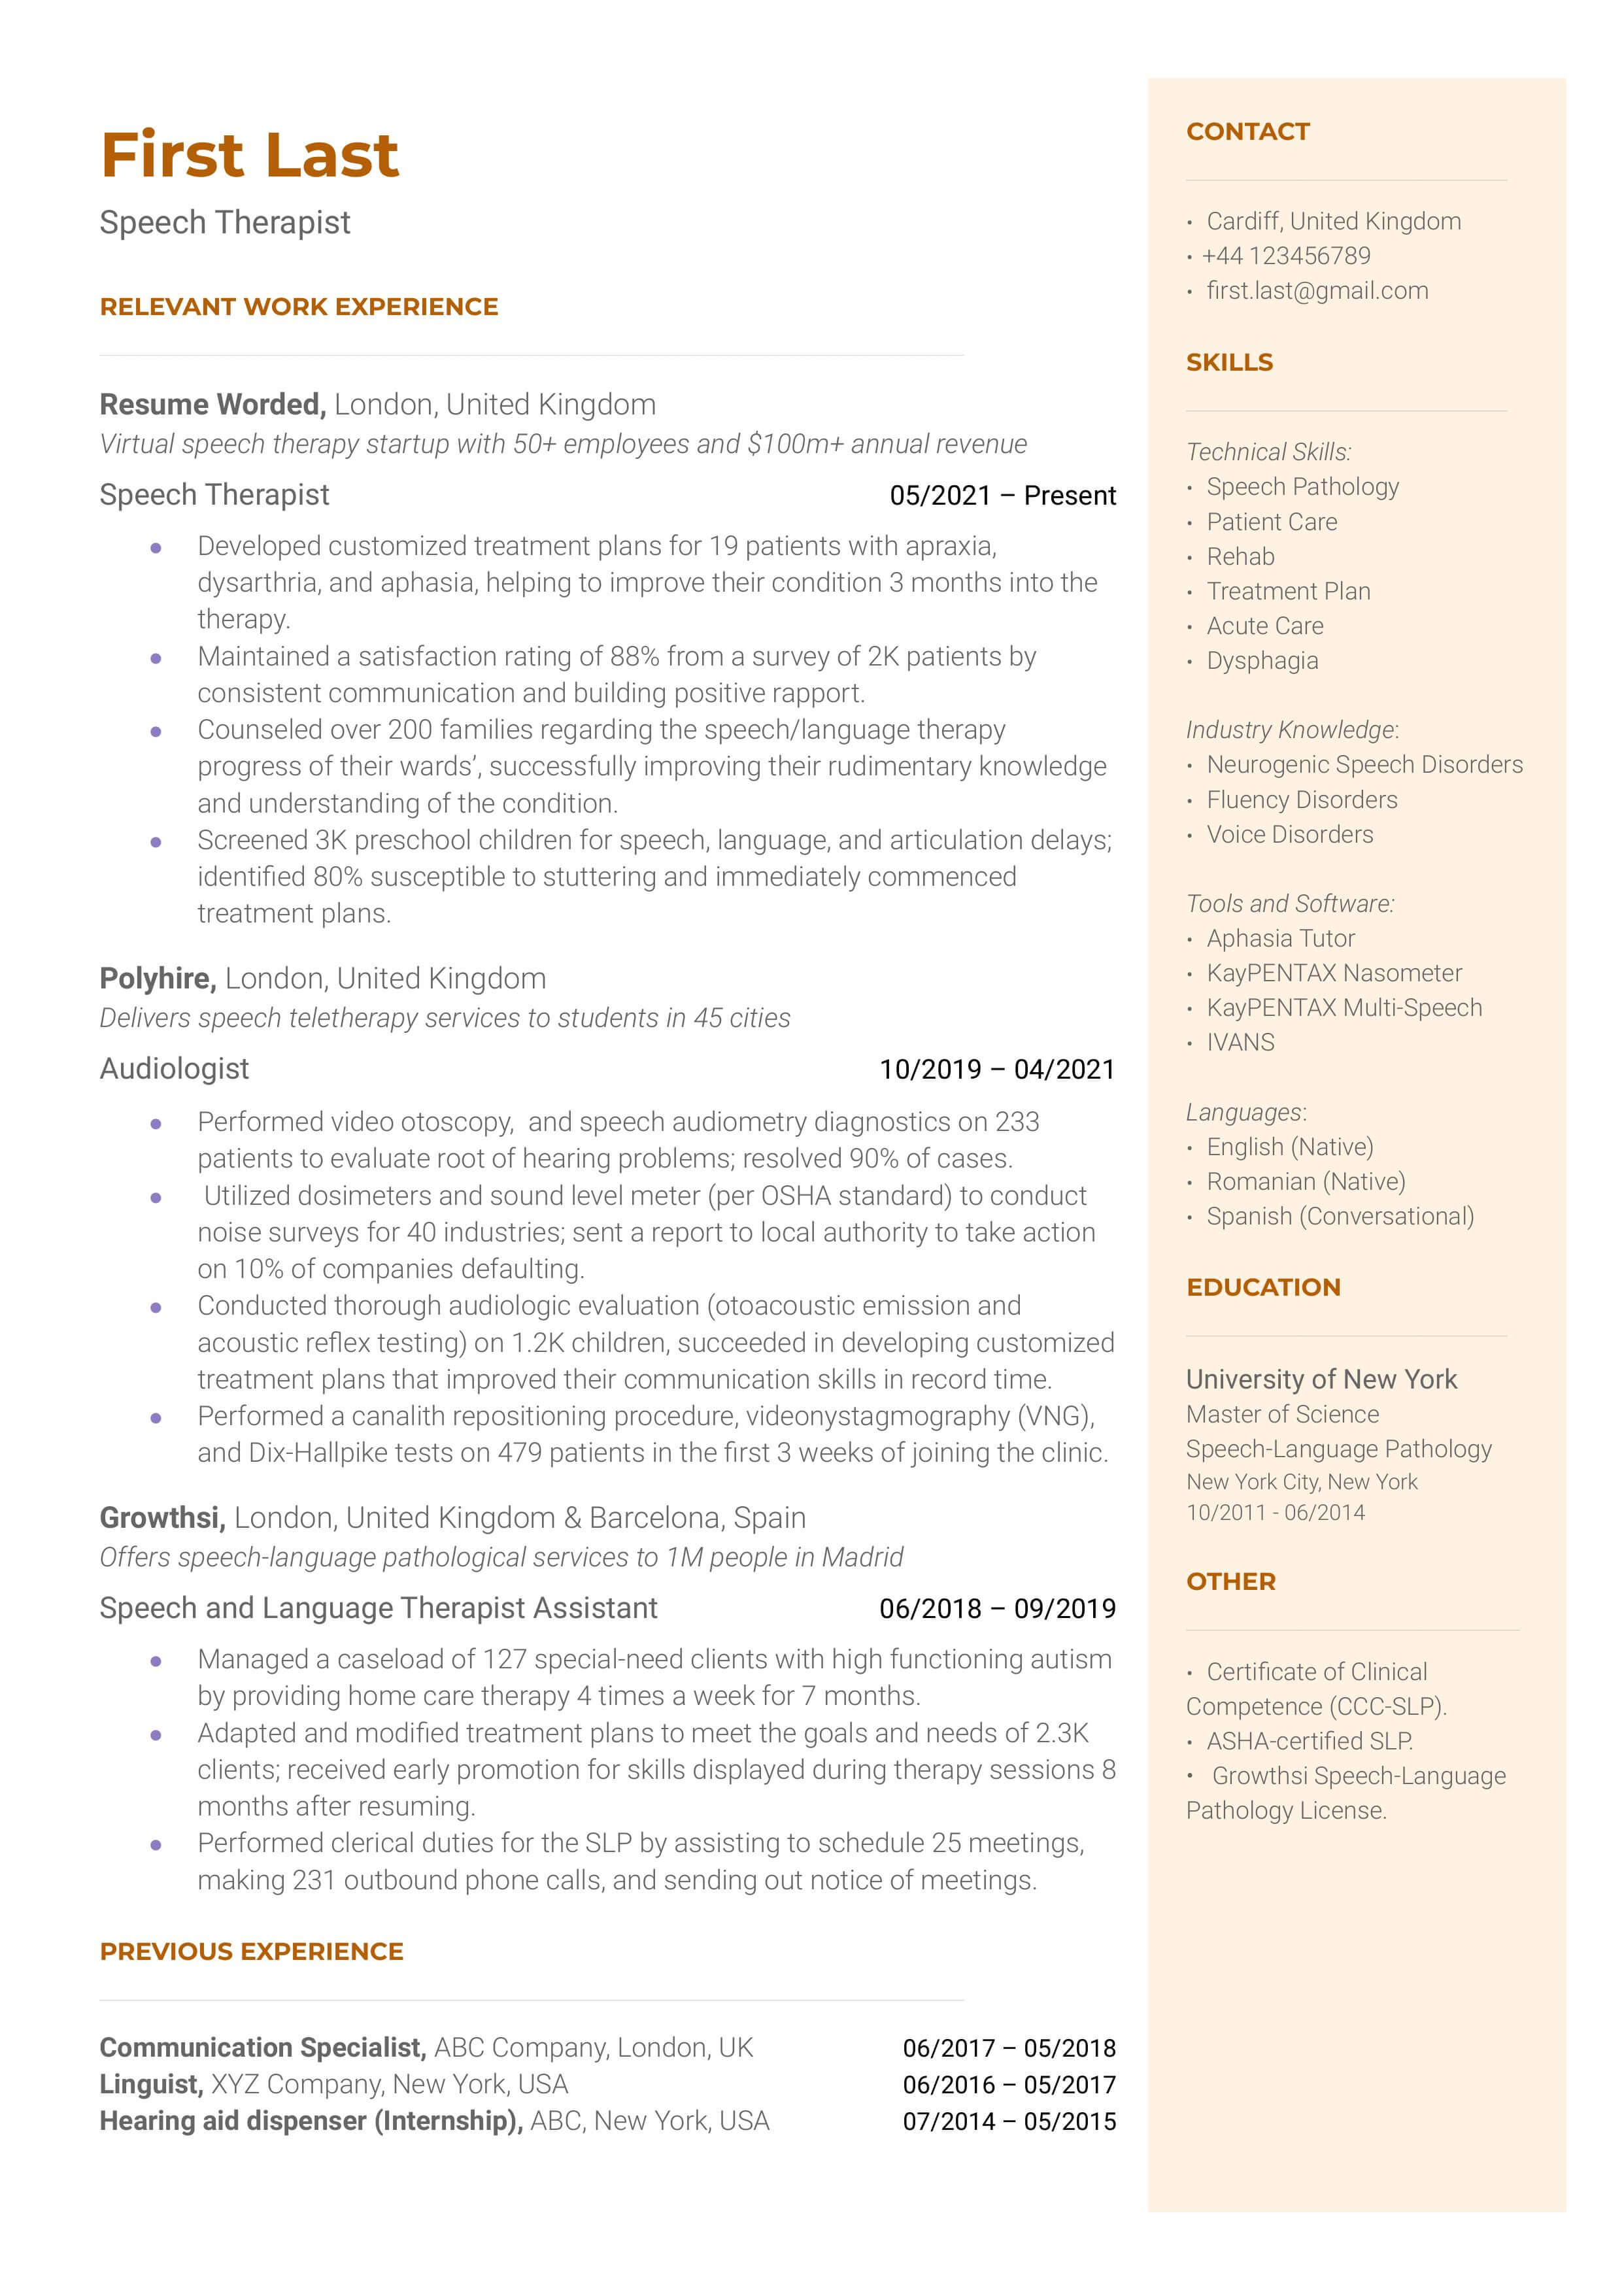 A speech therapist resume template highlighting skills, techniques, and tools.